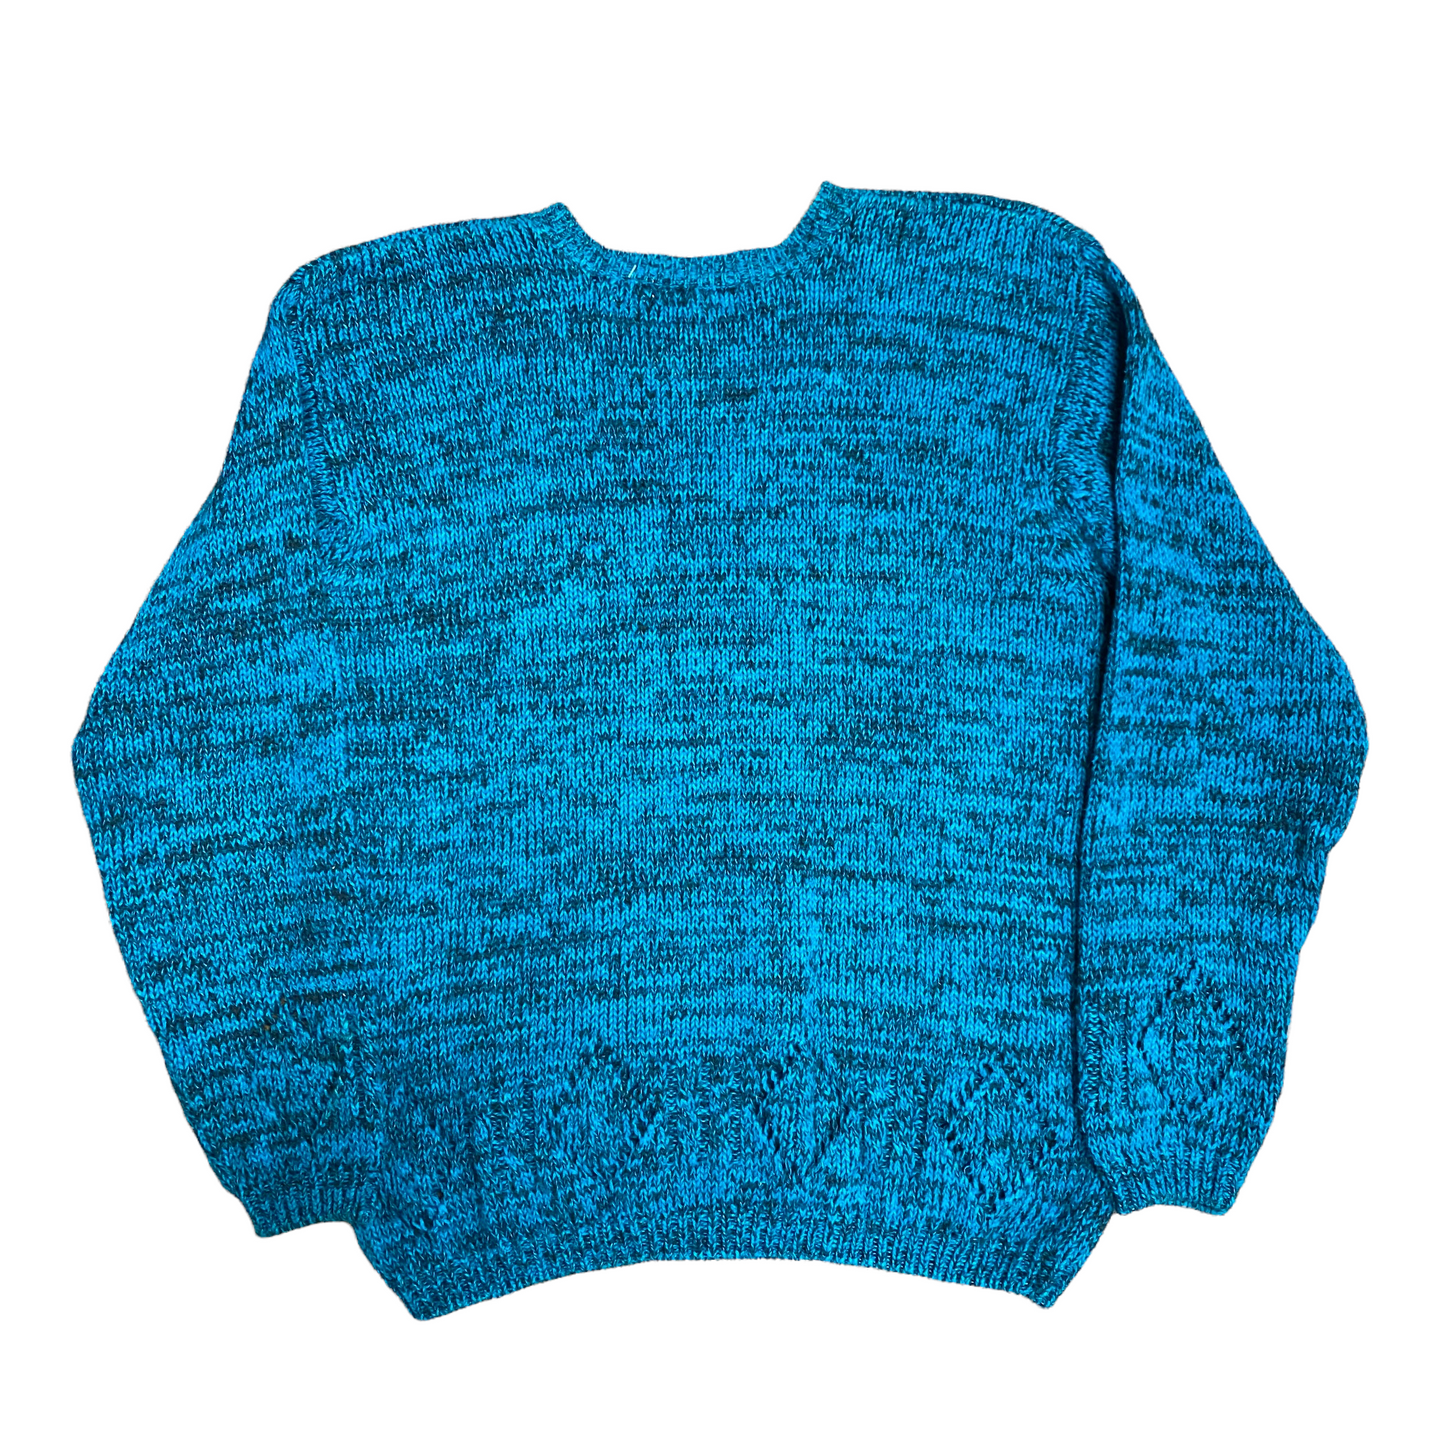 90s Knit Teal Sweater - Size Small